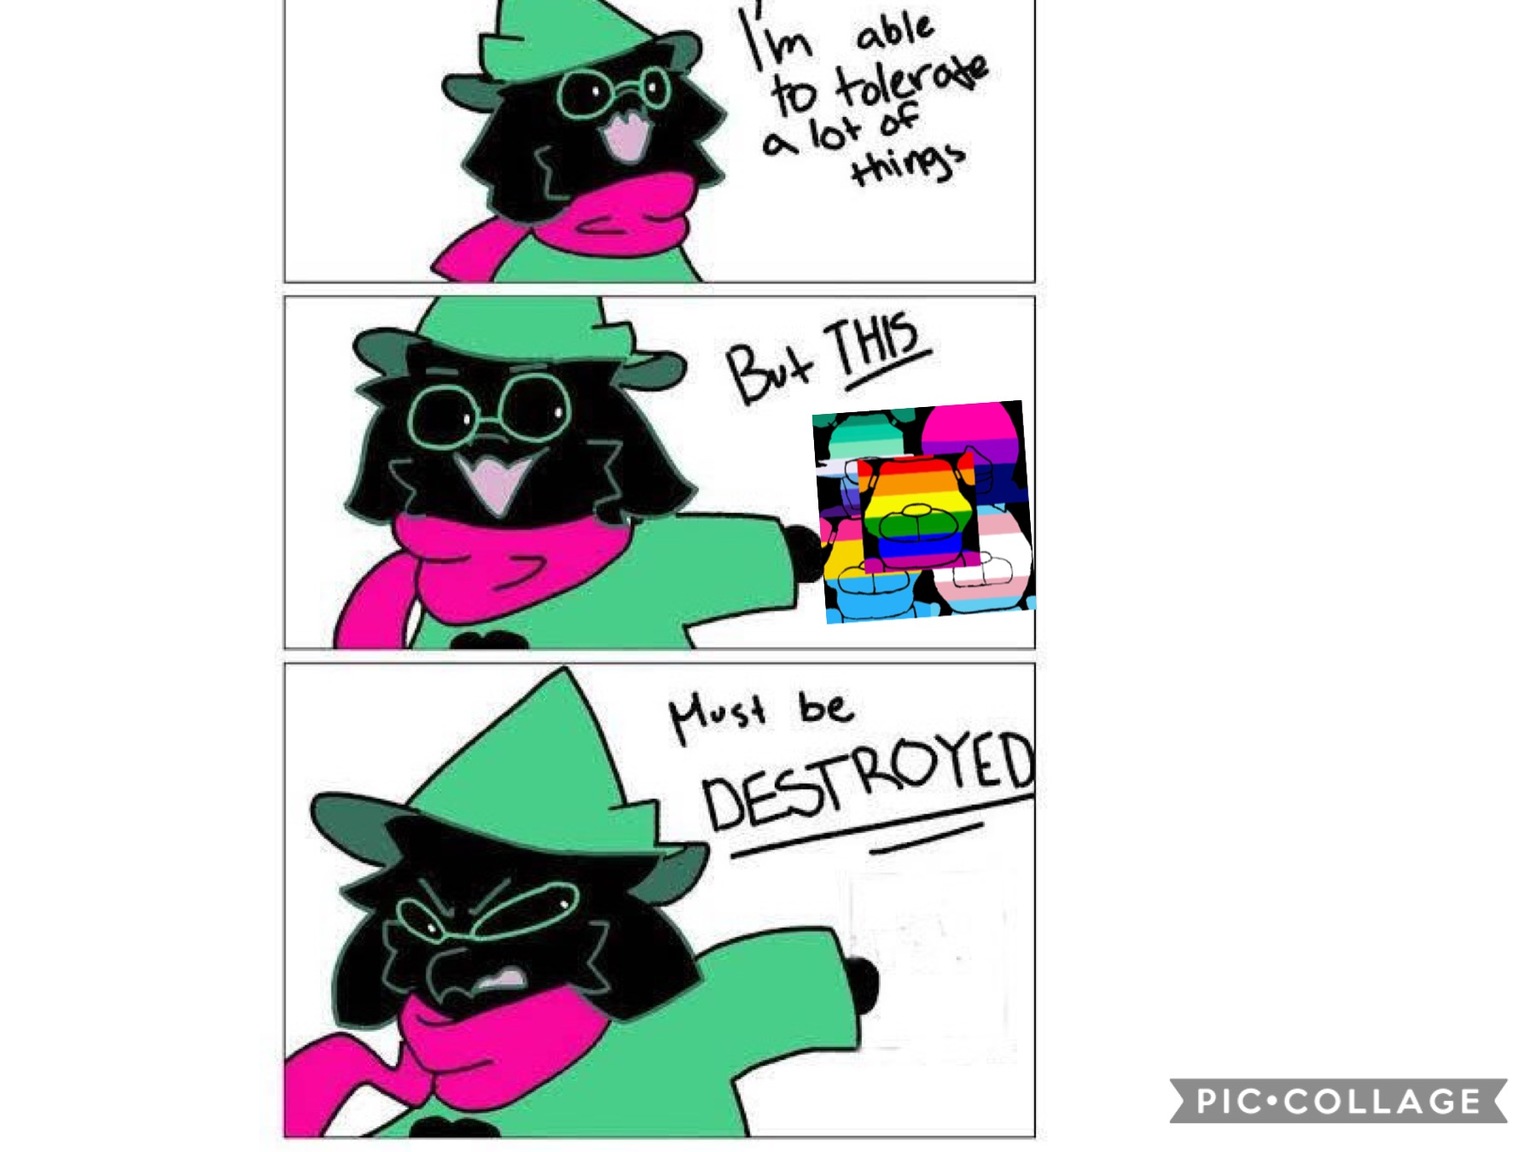 Bolty on X: Page 174 of To Kill A Mockingbird #Deltarune https